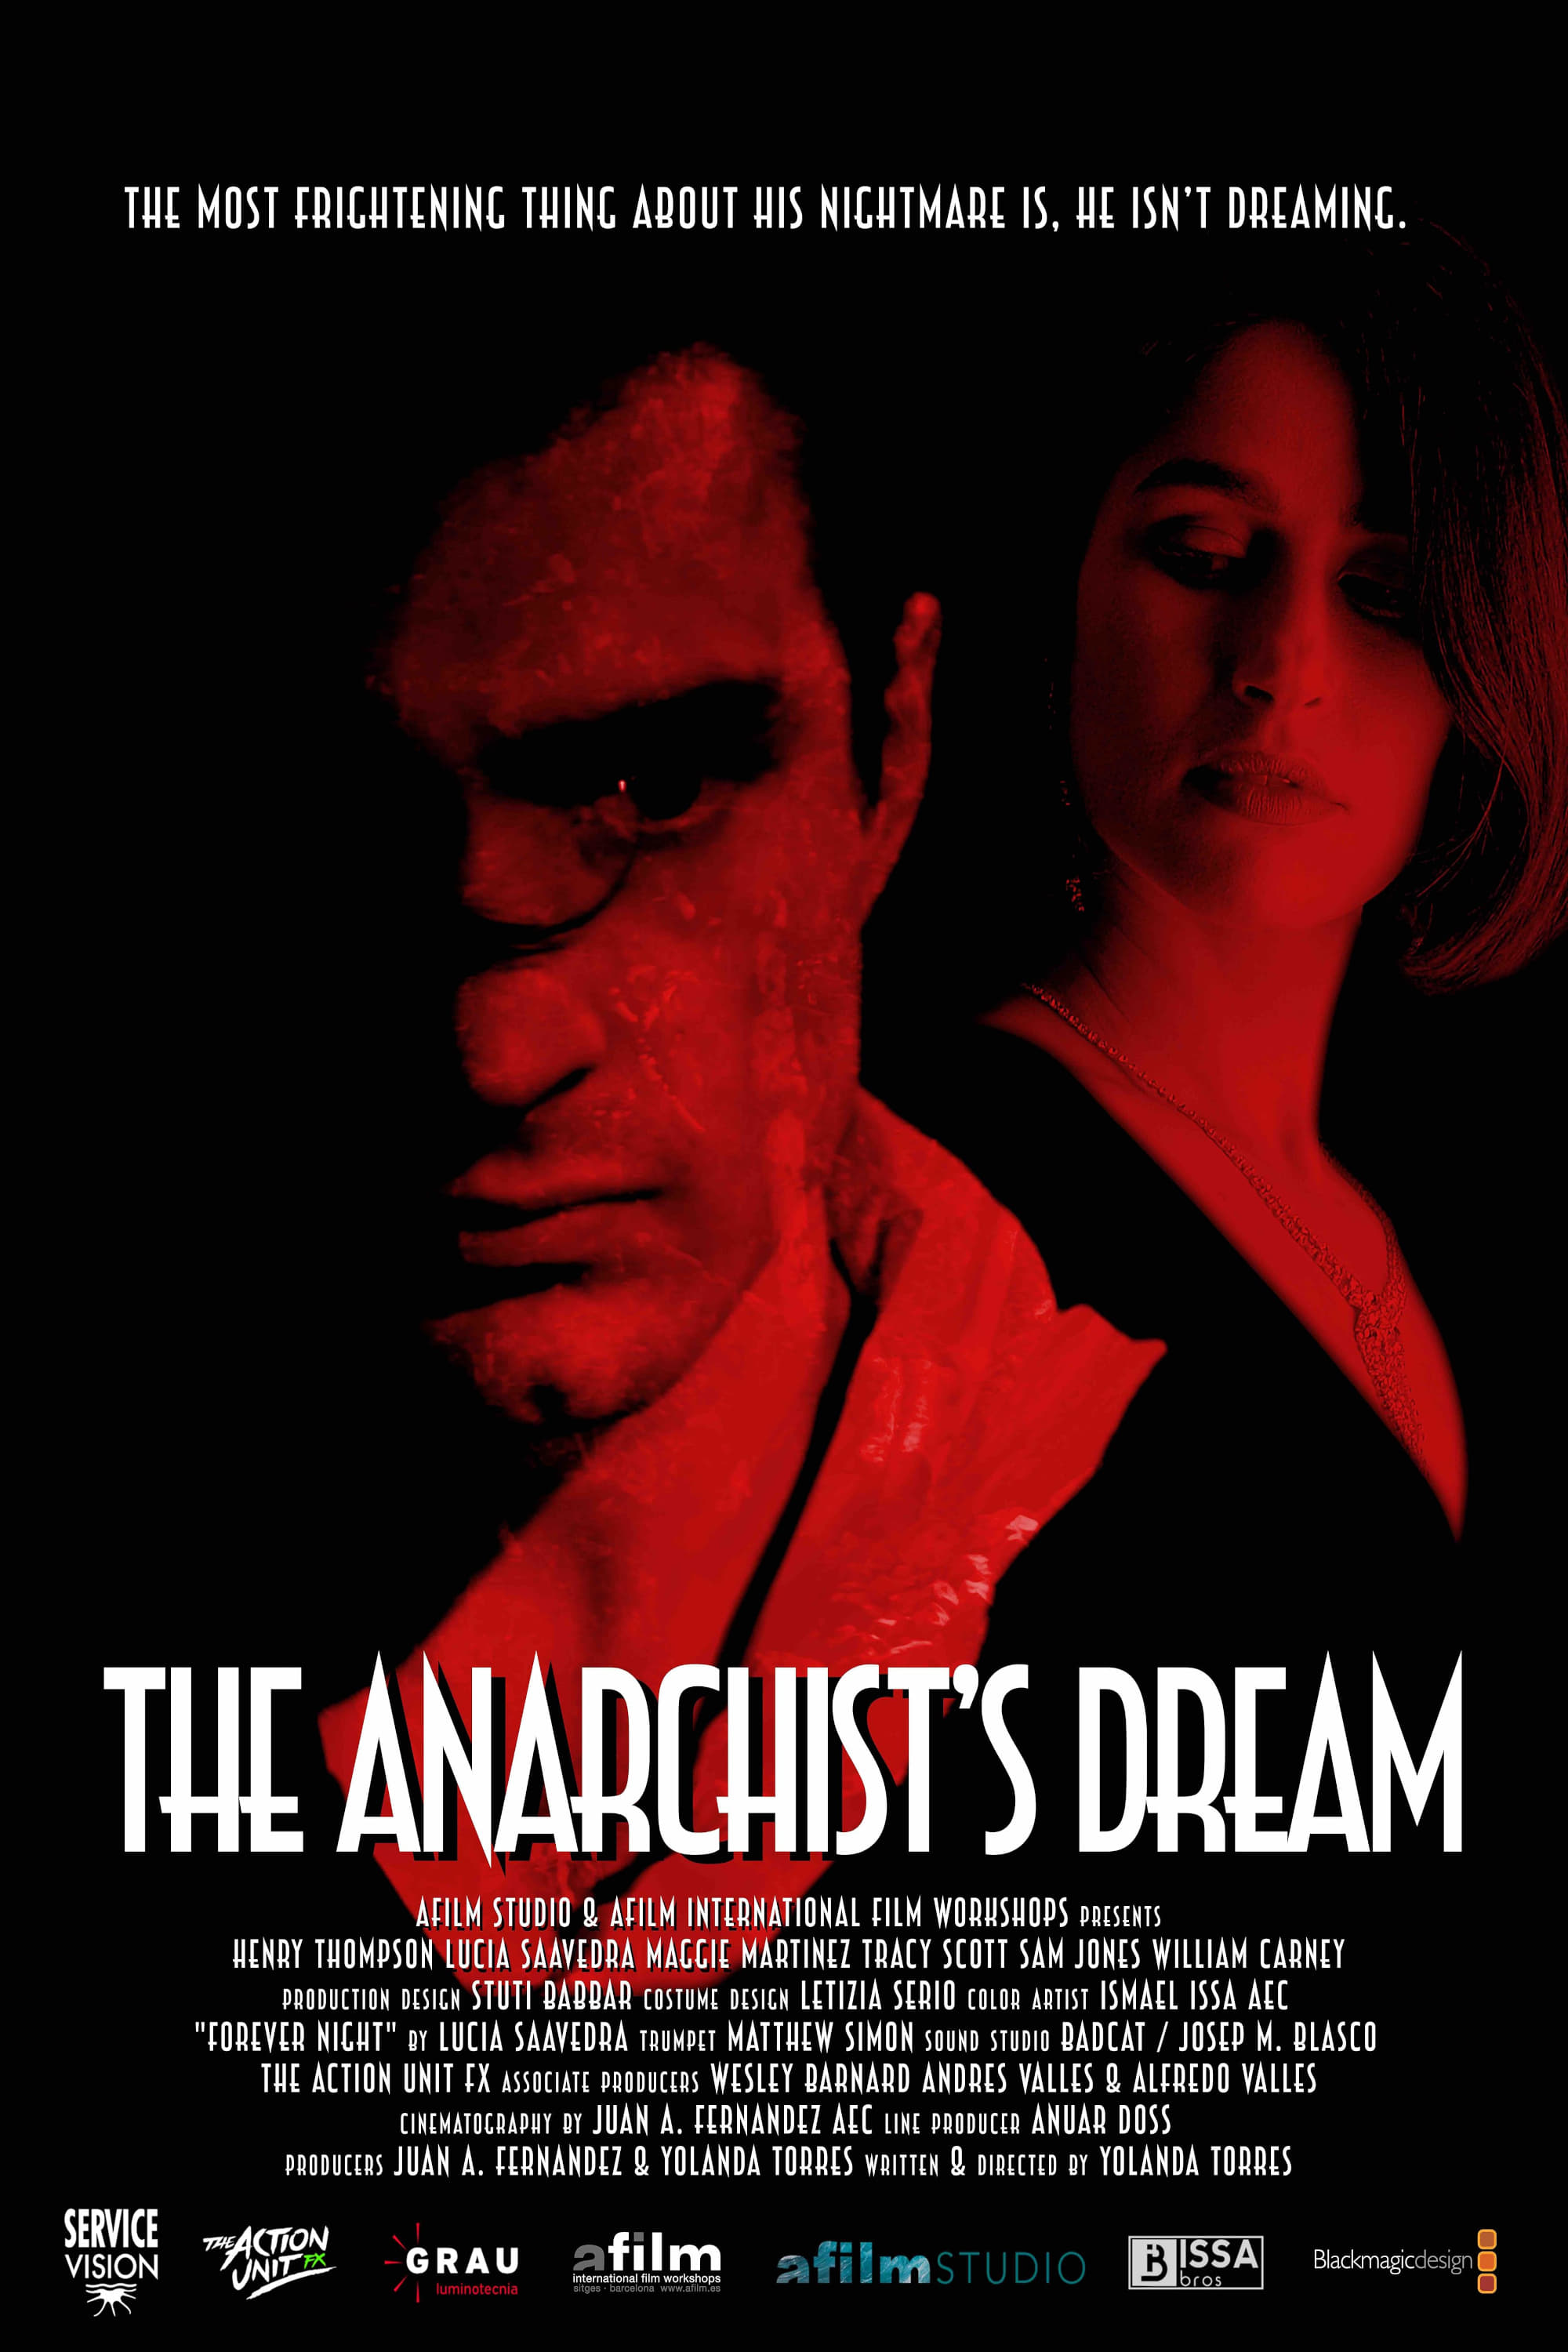 The Anarchist's Dream